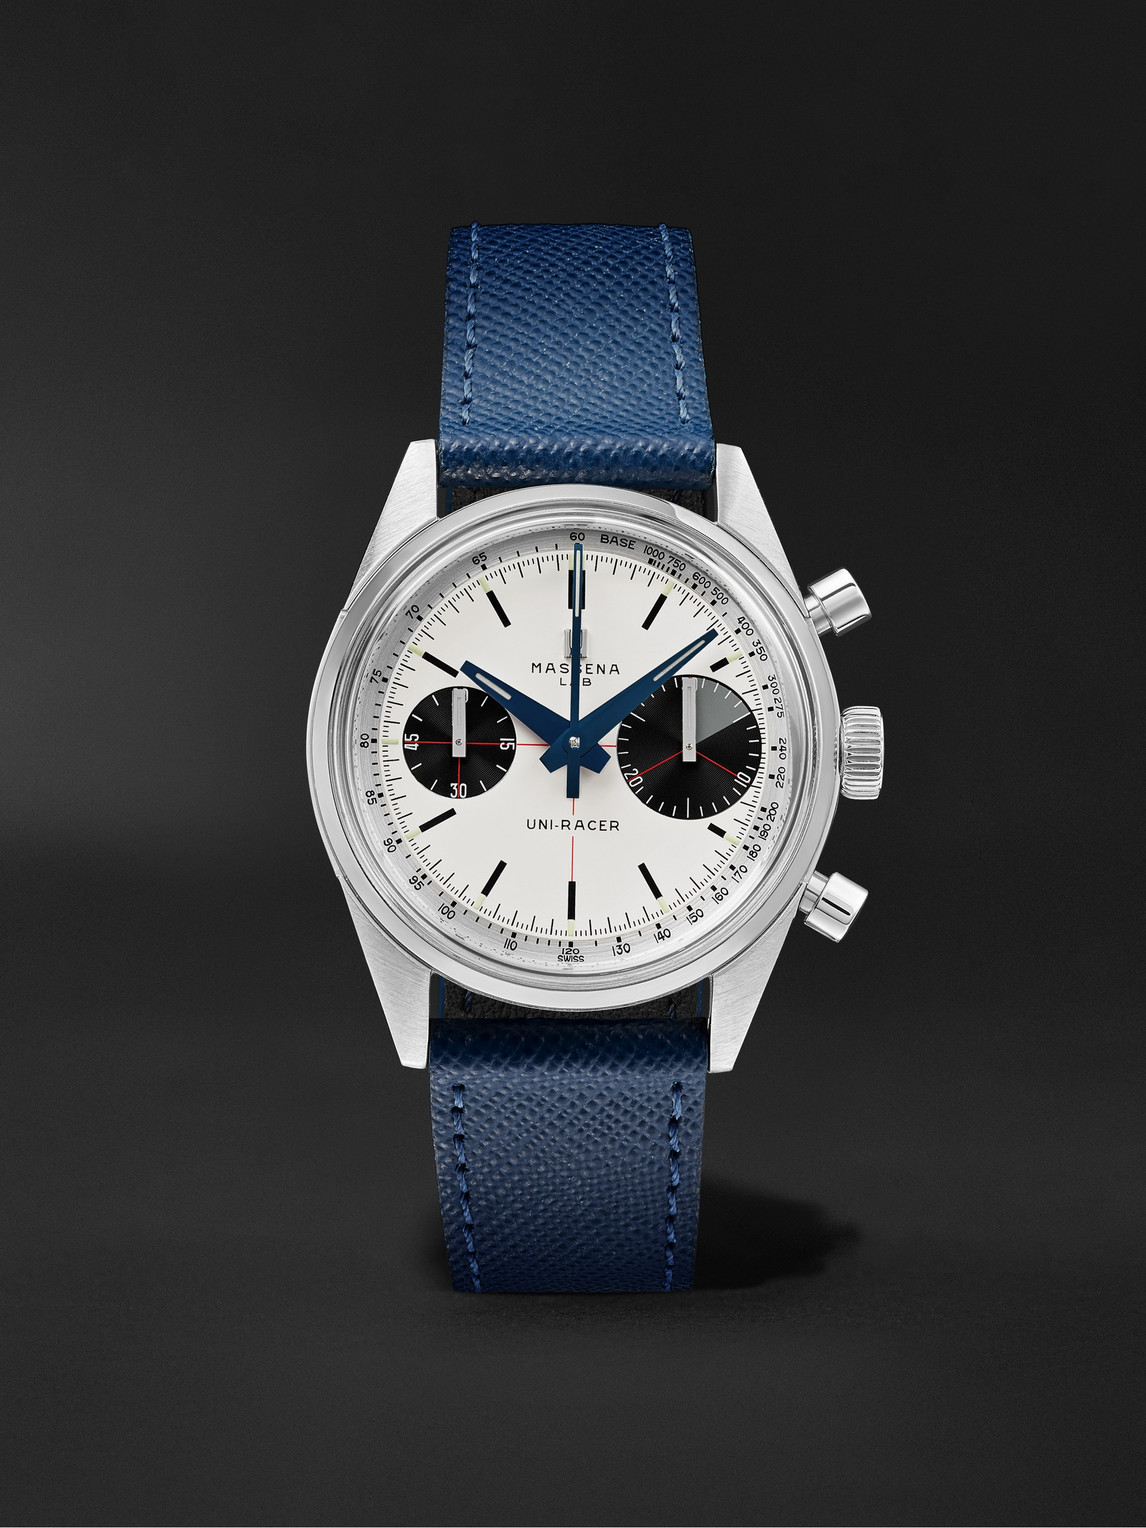 Massena Lab Uni-racer Limited Edition Hand-wound Chronograph 39mm Stainless Steel And Cross-grain Leather Watch, In White